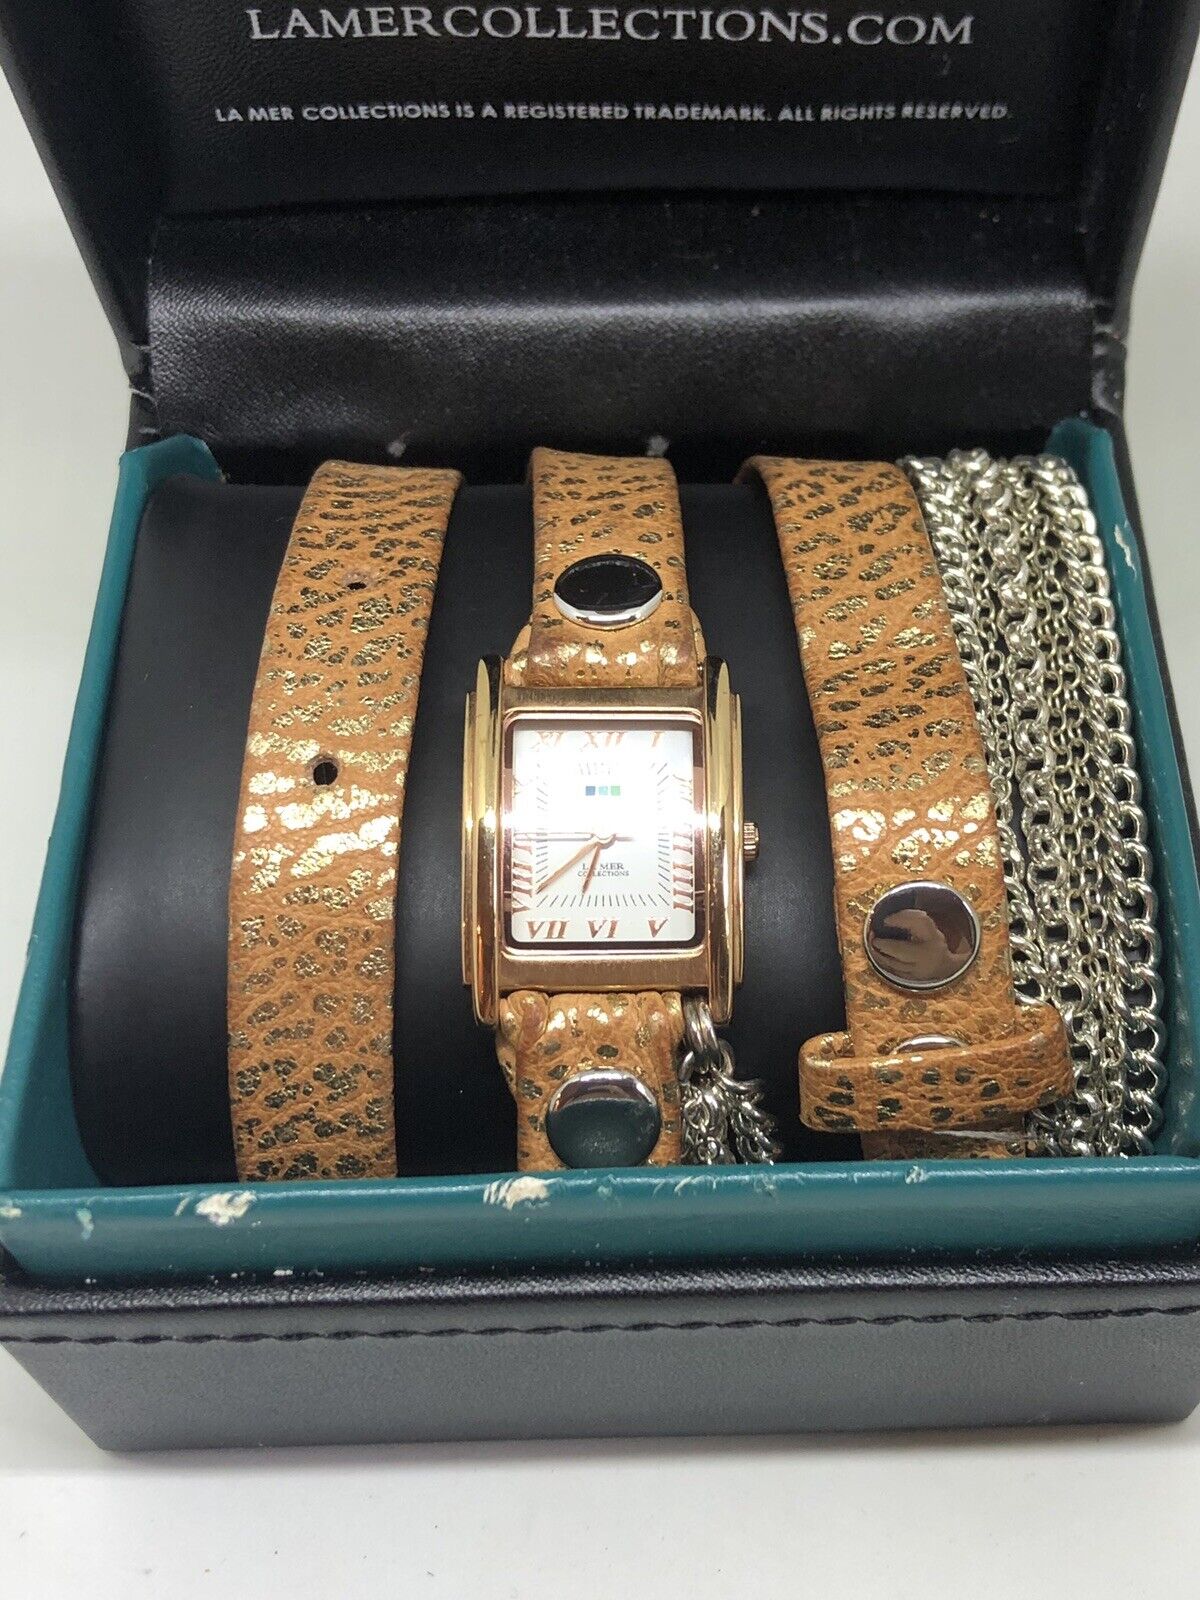 La Mer Collections - Rose Gold and Leather Wrap Bracelet Watch